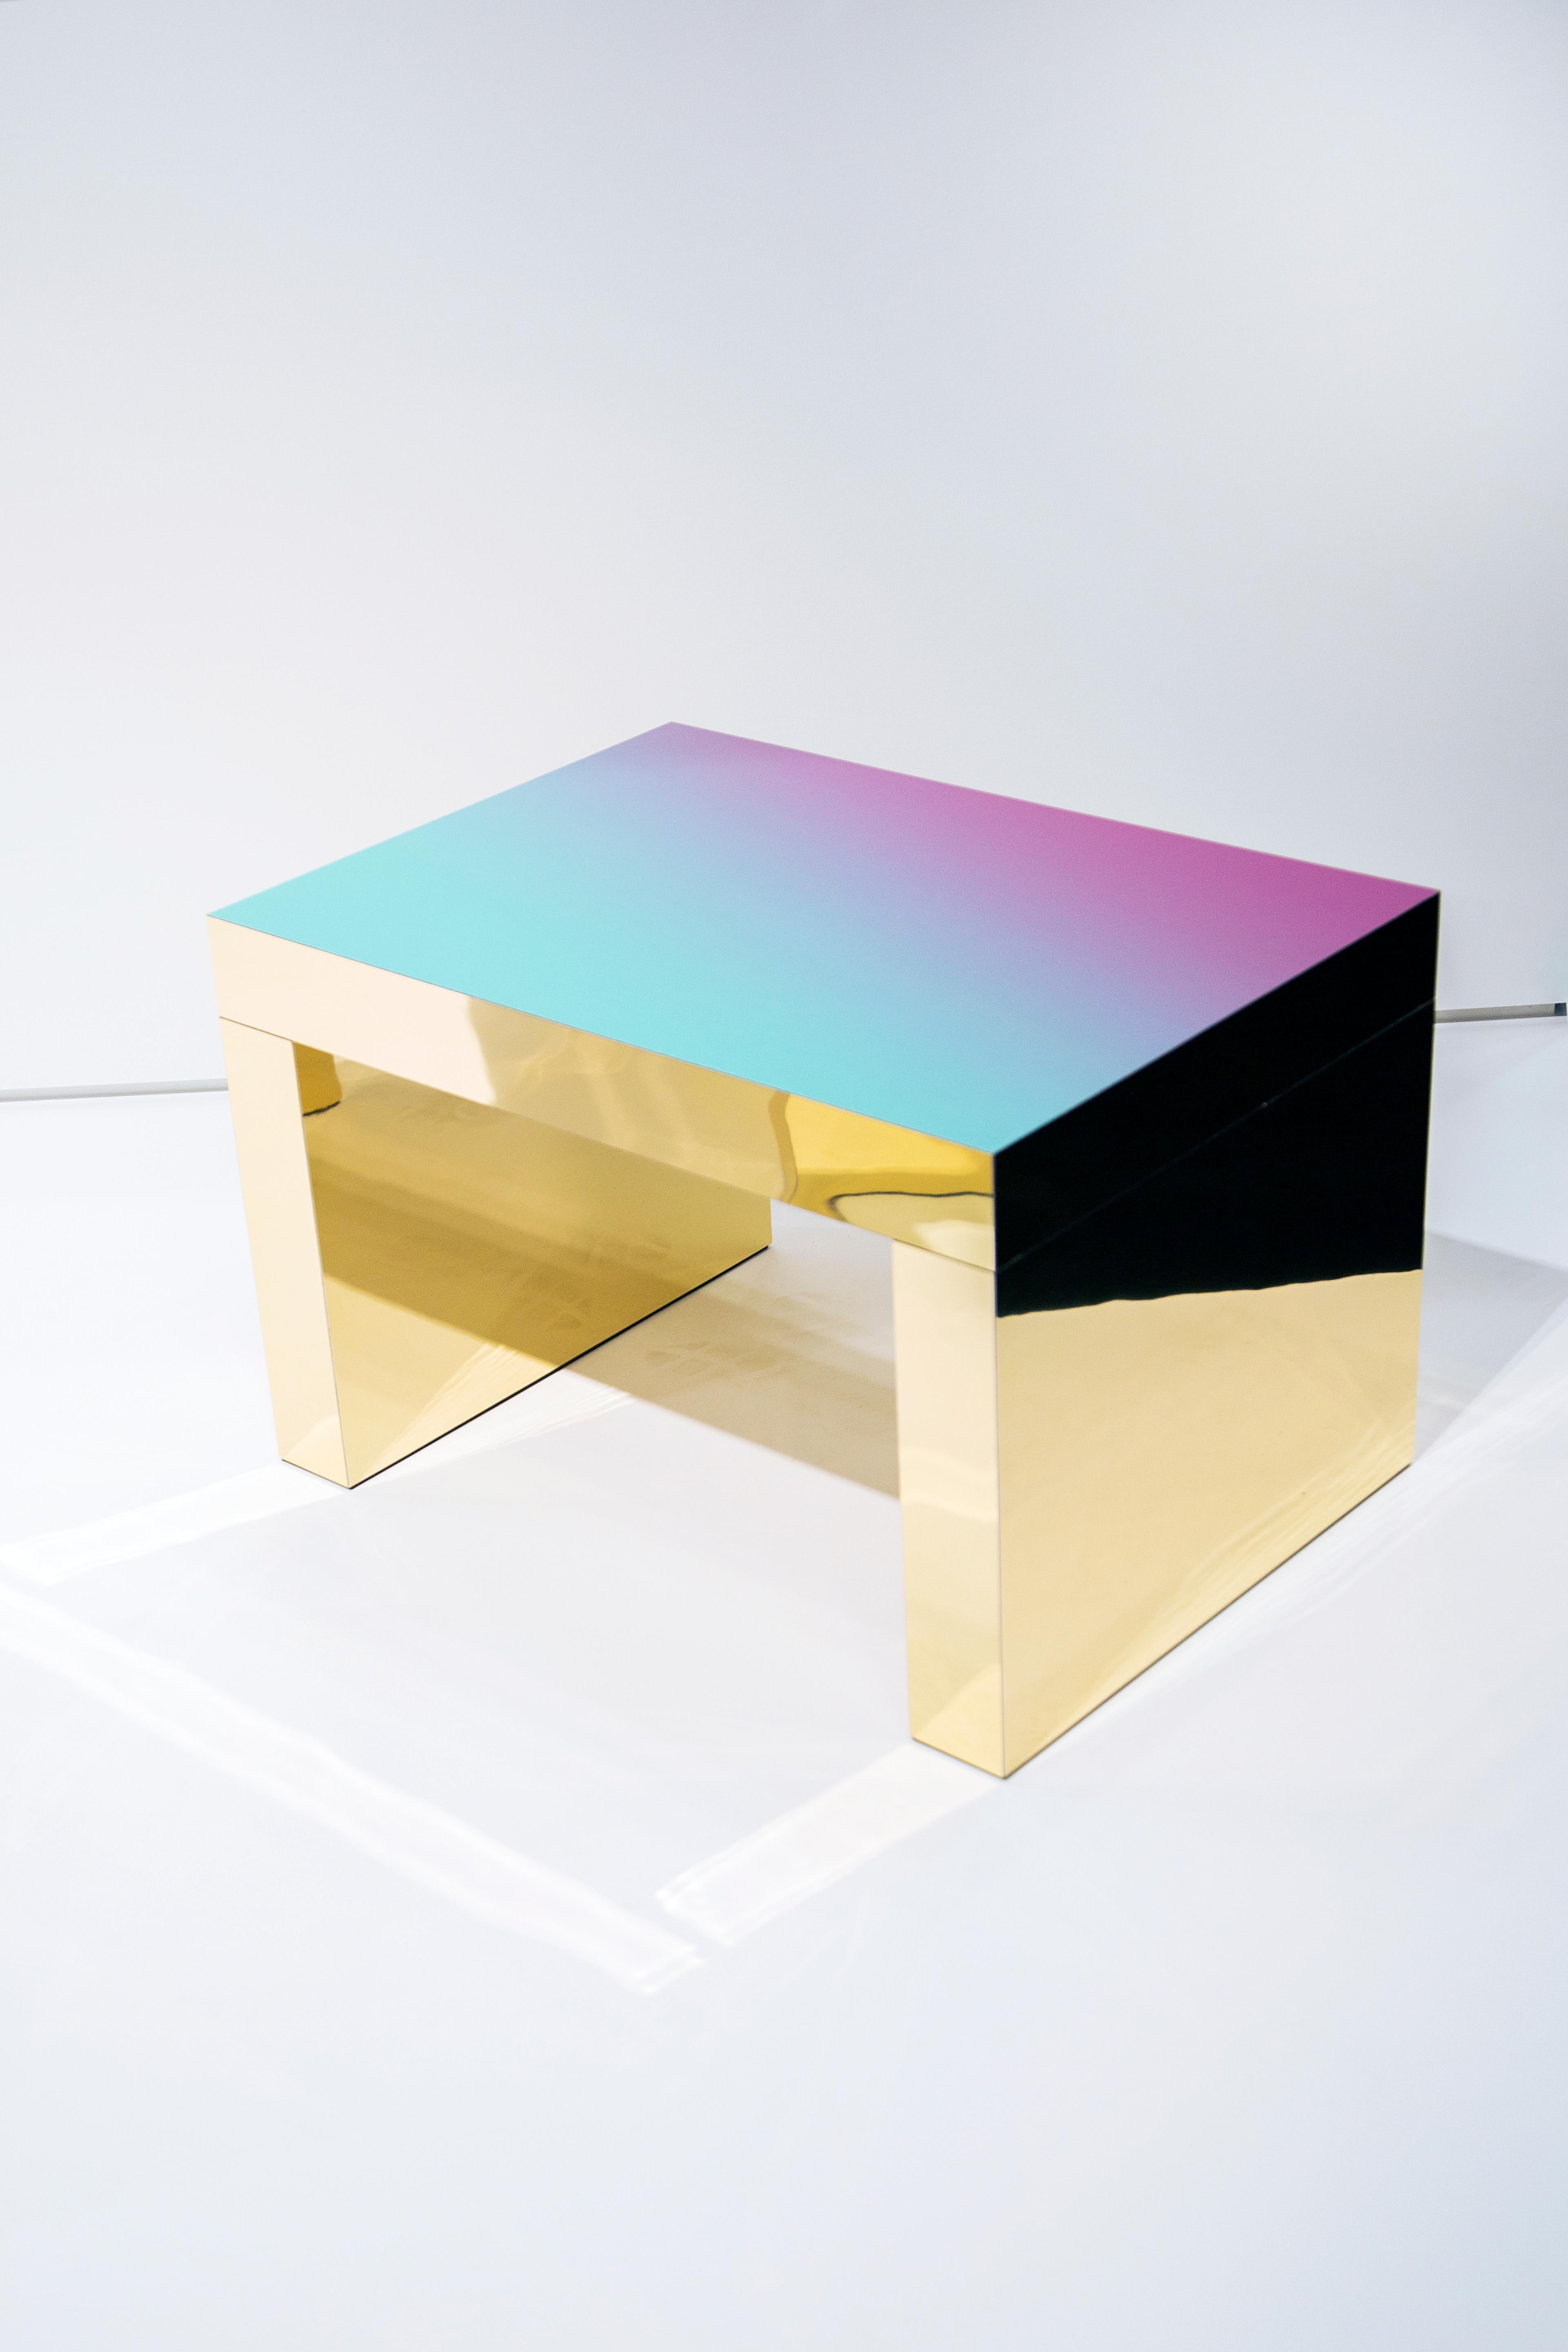 Gaby gradient desk by Chapel Petrassi
Dimensions: 125 x 80 x 75 cm
Materials: Polished Aluminium, Tailor made HPL laminate



Chapel Petrassi is a contemporary design and manufacturing company based in Paris and Naples founded by designers